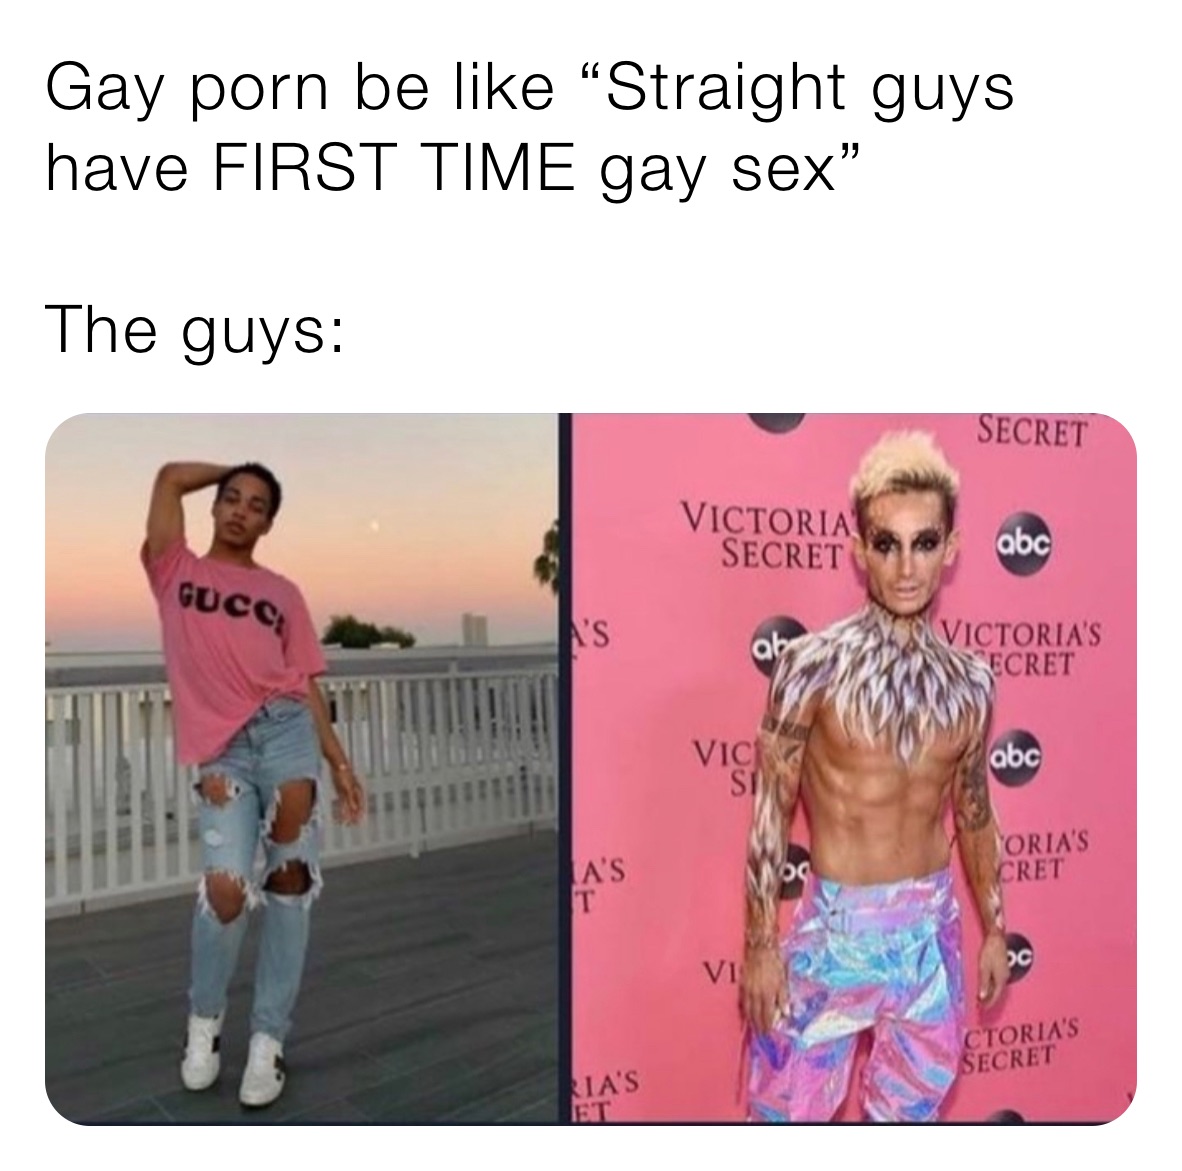 Sex Oral Memes - Gay porn be like â€œStraight guys have FIRST TIME gay sexâ€ The guys: |  @christian_macos | Memes